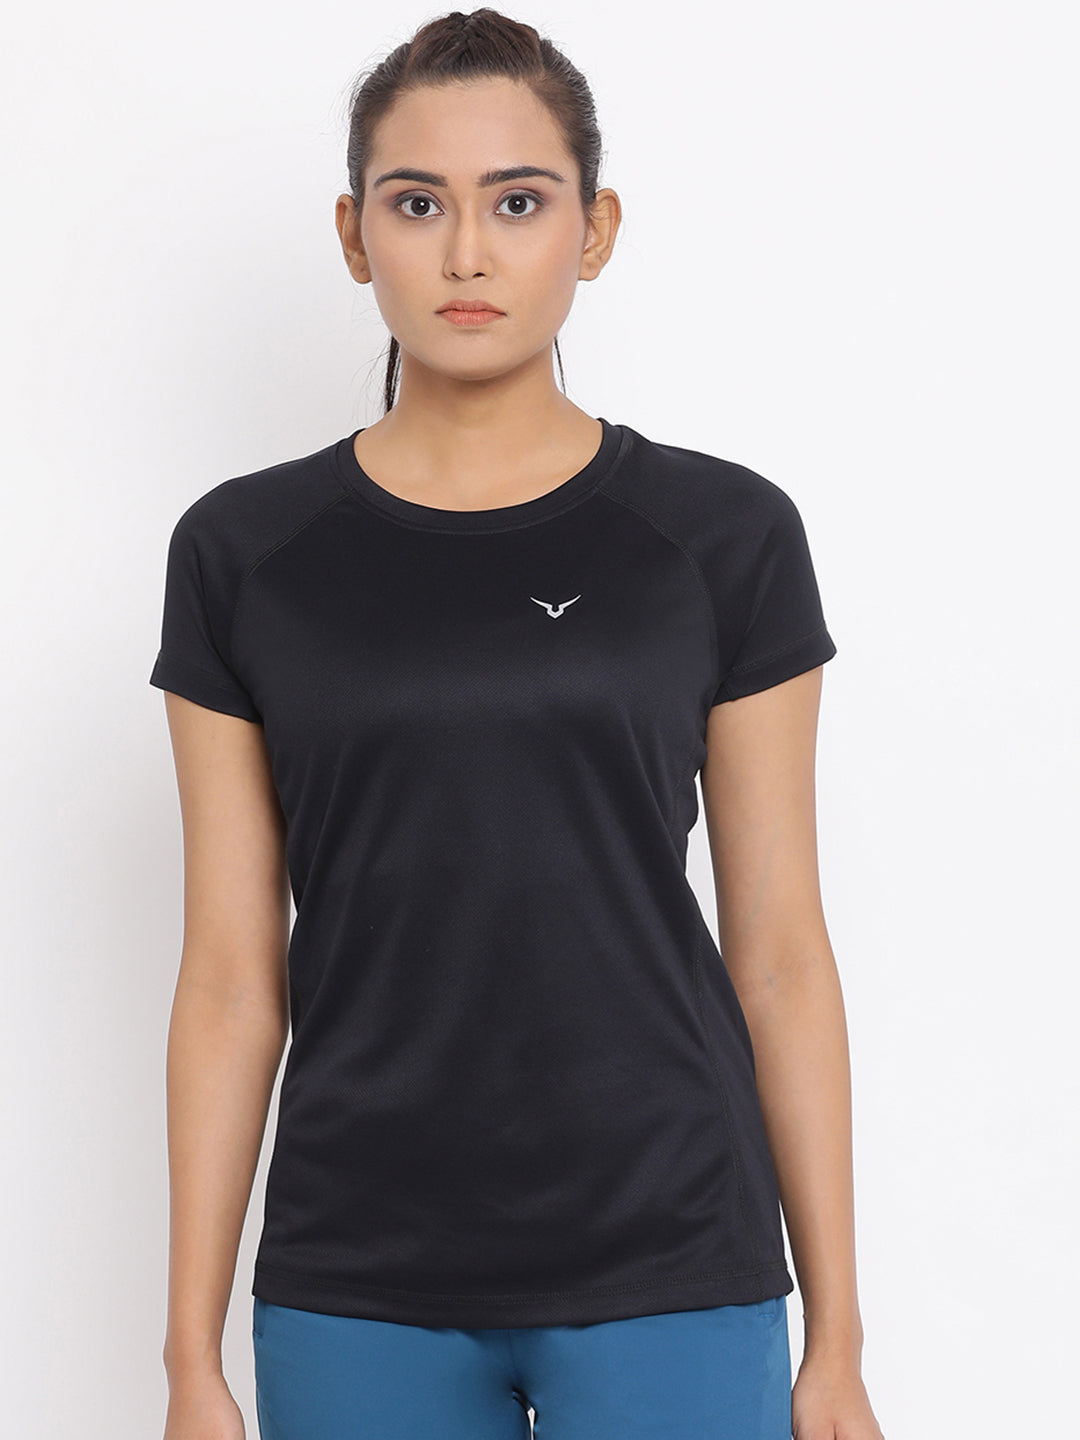 Invincible Women’s Gym Yoga Solid Tee